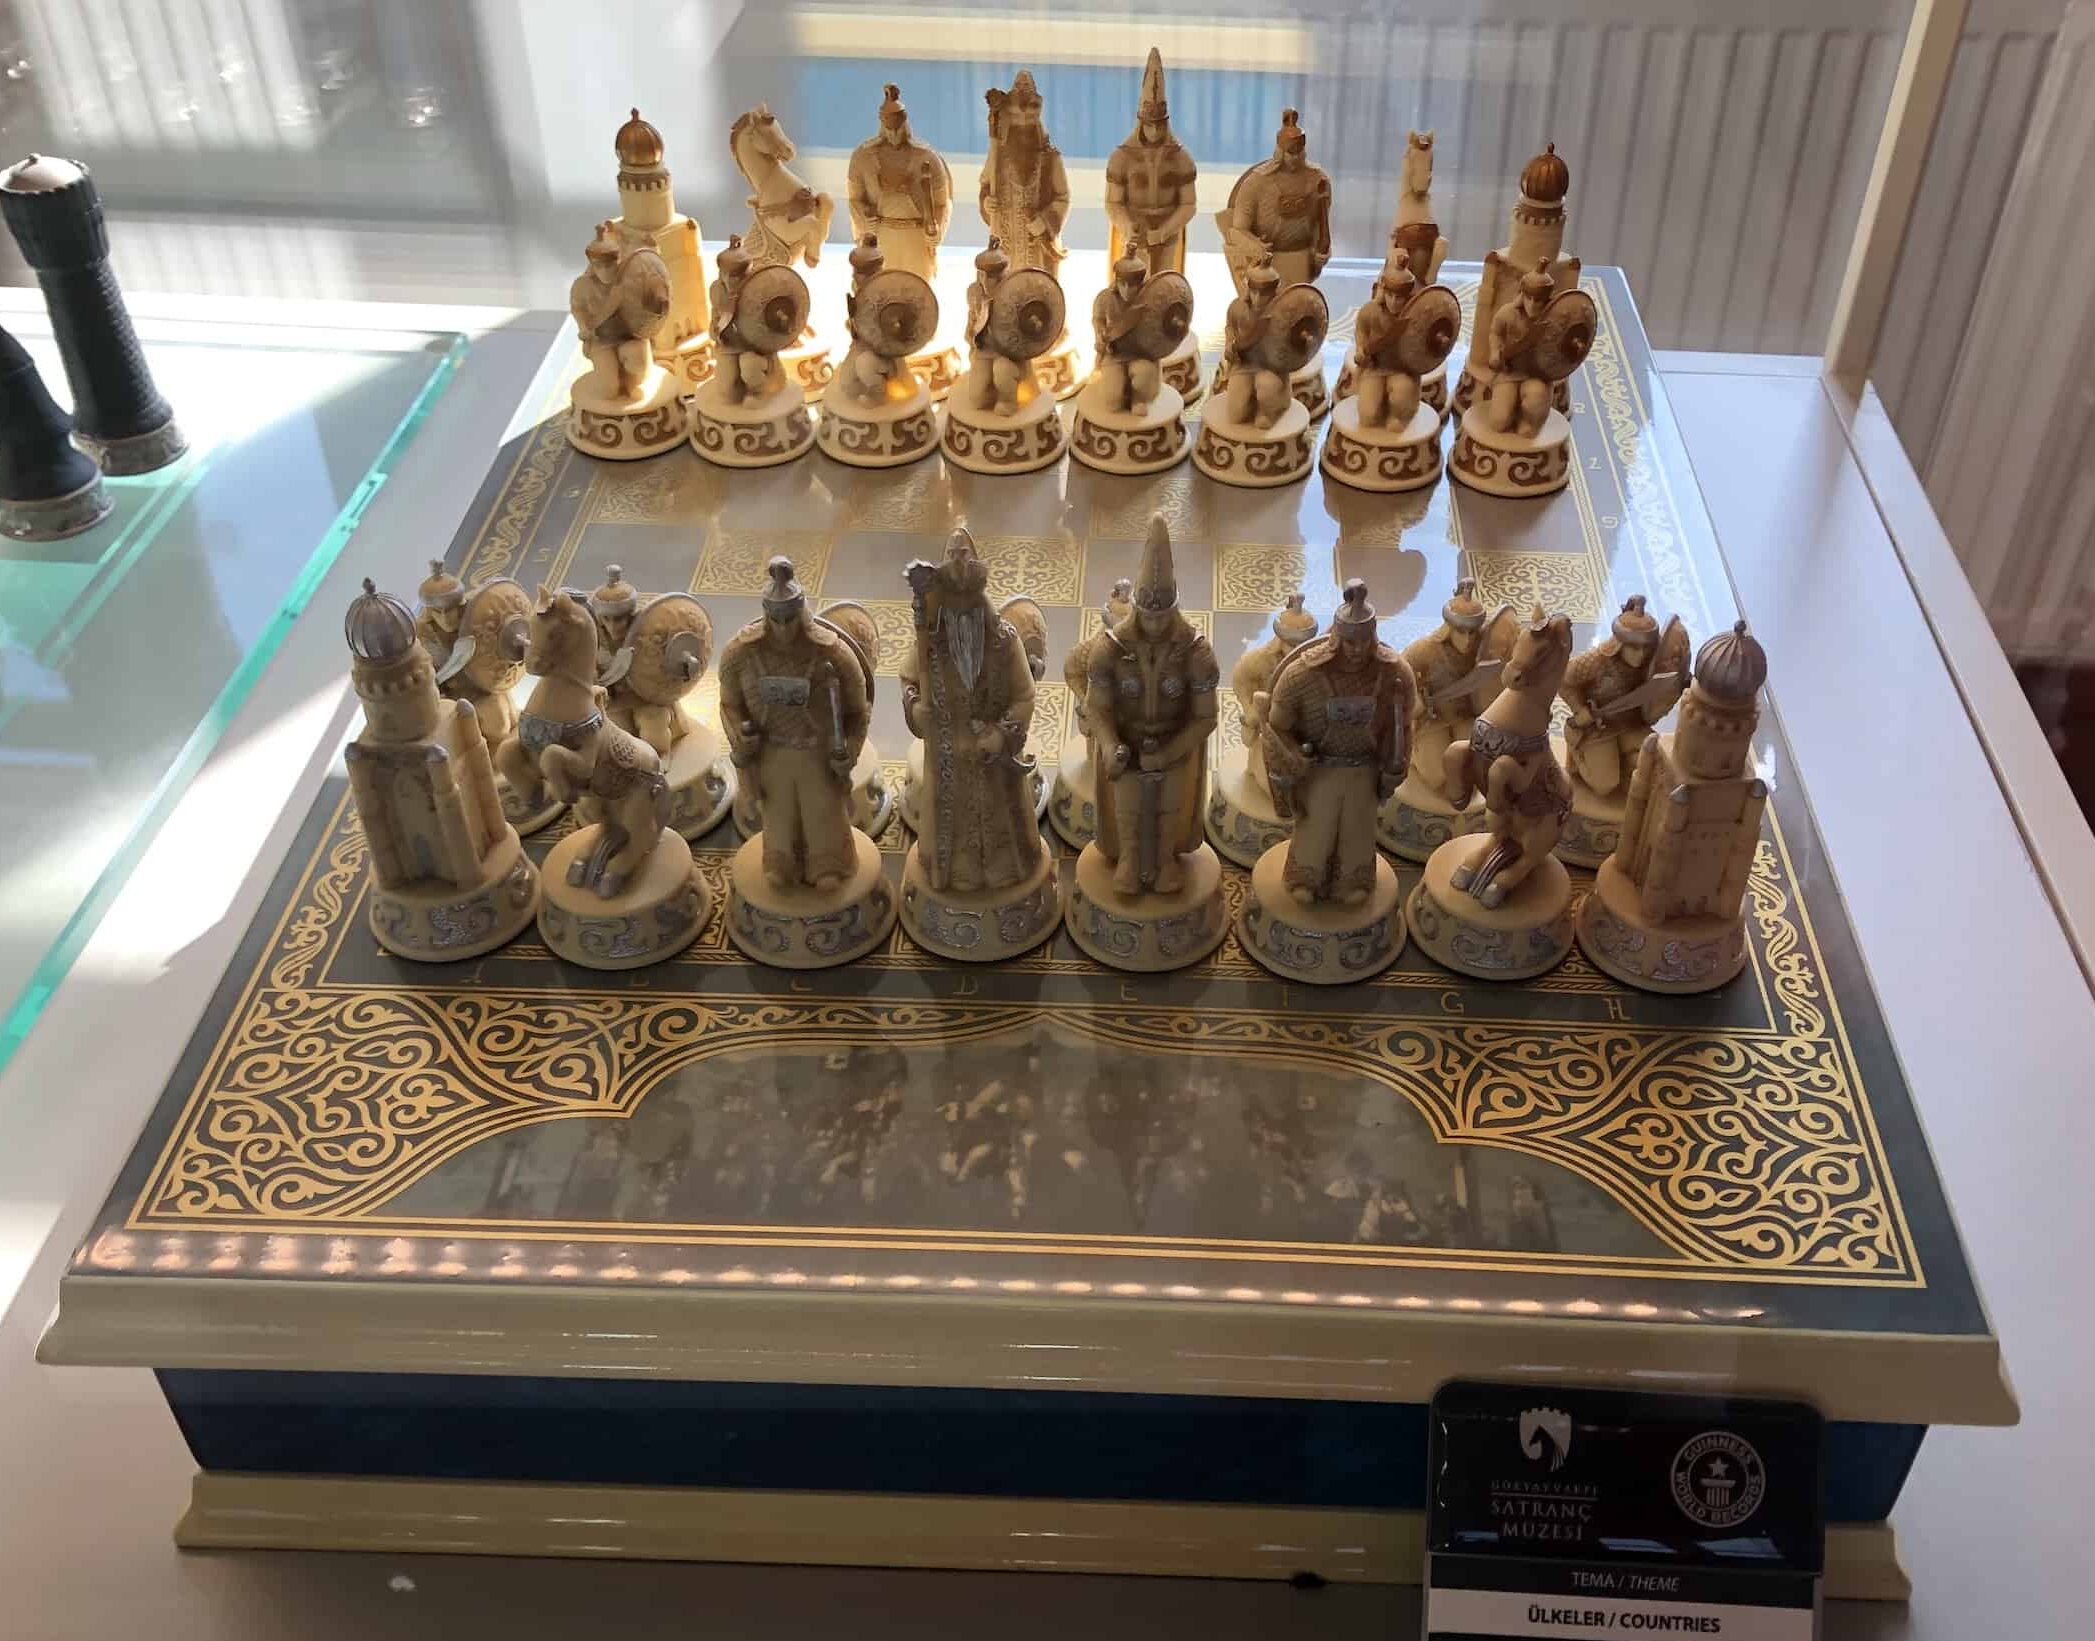 Ceramic chess set with gold and silver inlays (Kazakhstan)